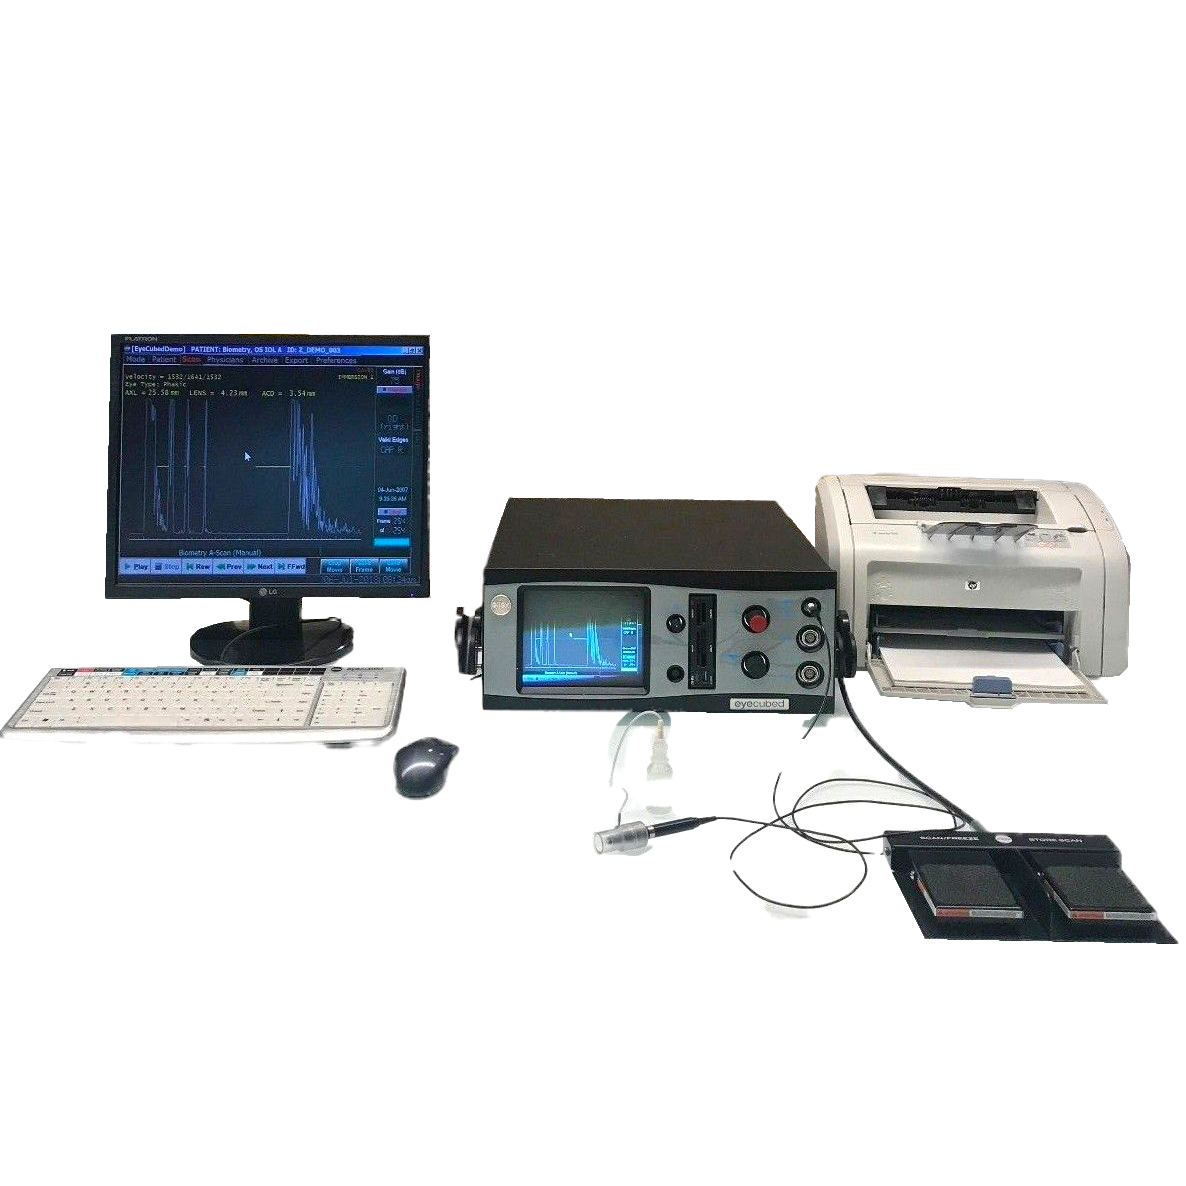 ELLEX Eyecubed I3 A Scan w Printer Keyboard Footswitch Probe Pachymeters, Ultrasounds, Pupilometers and A/B Scans